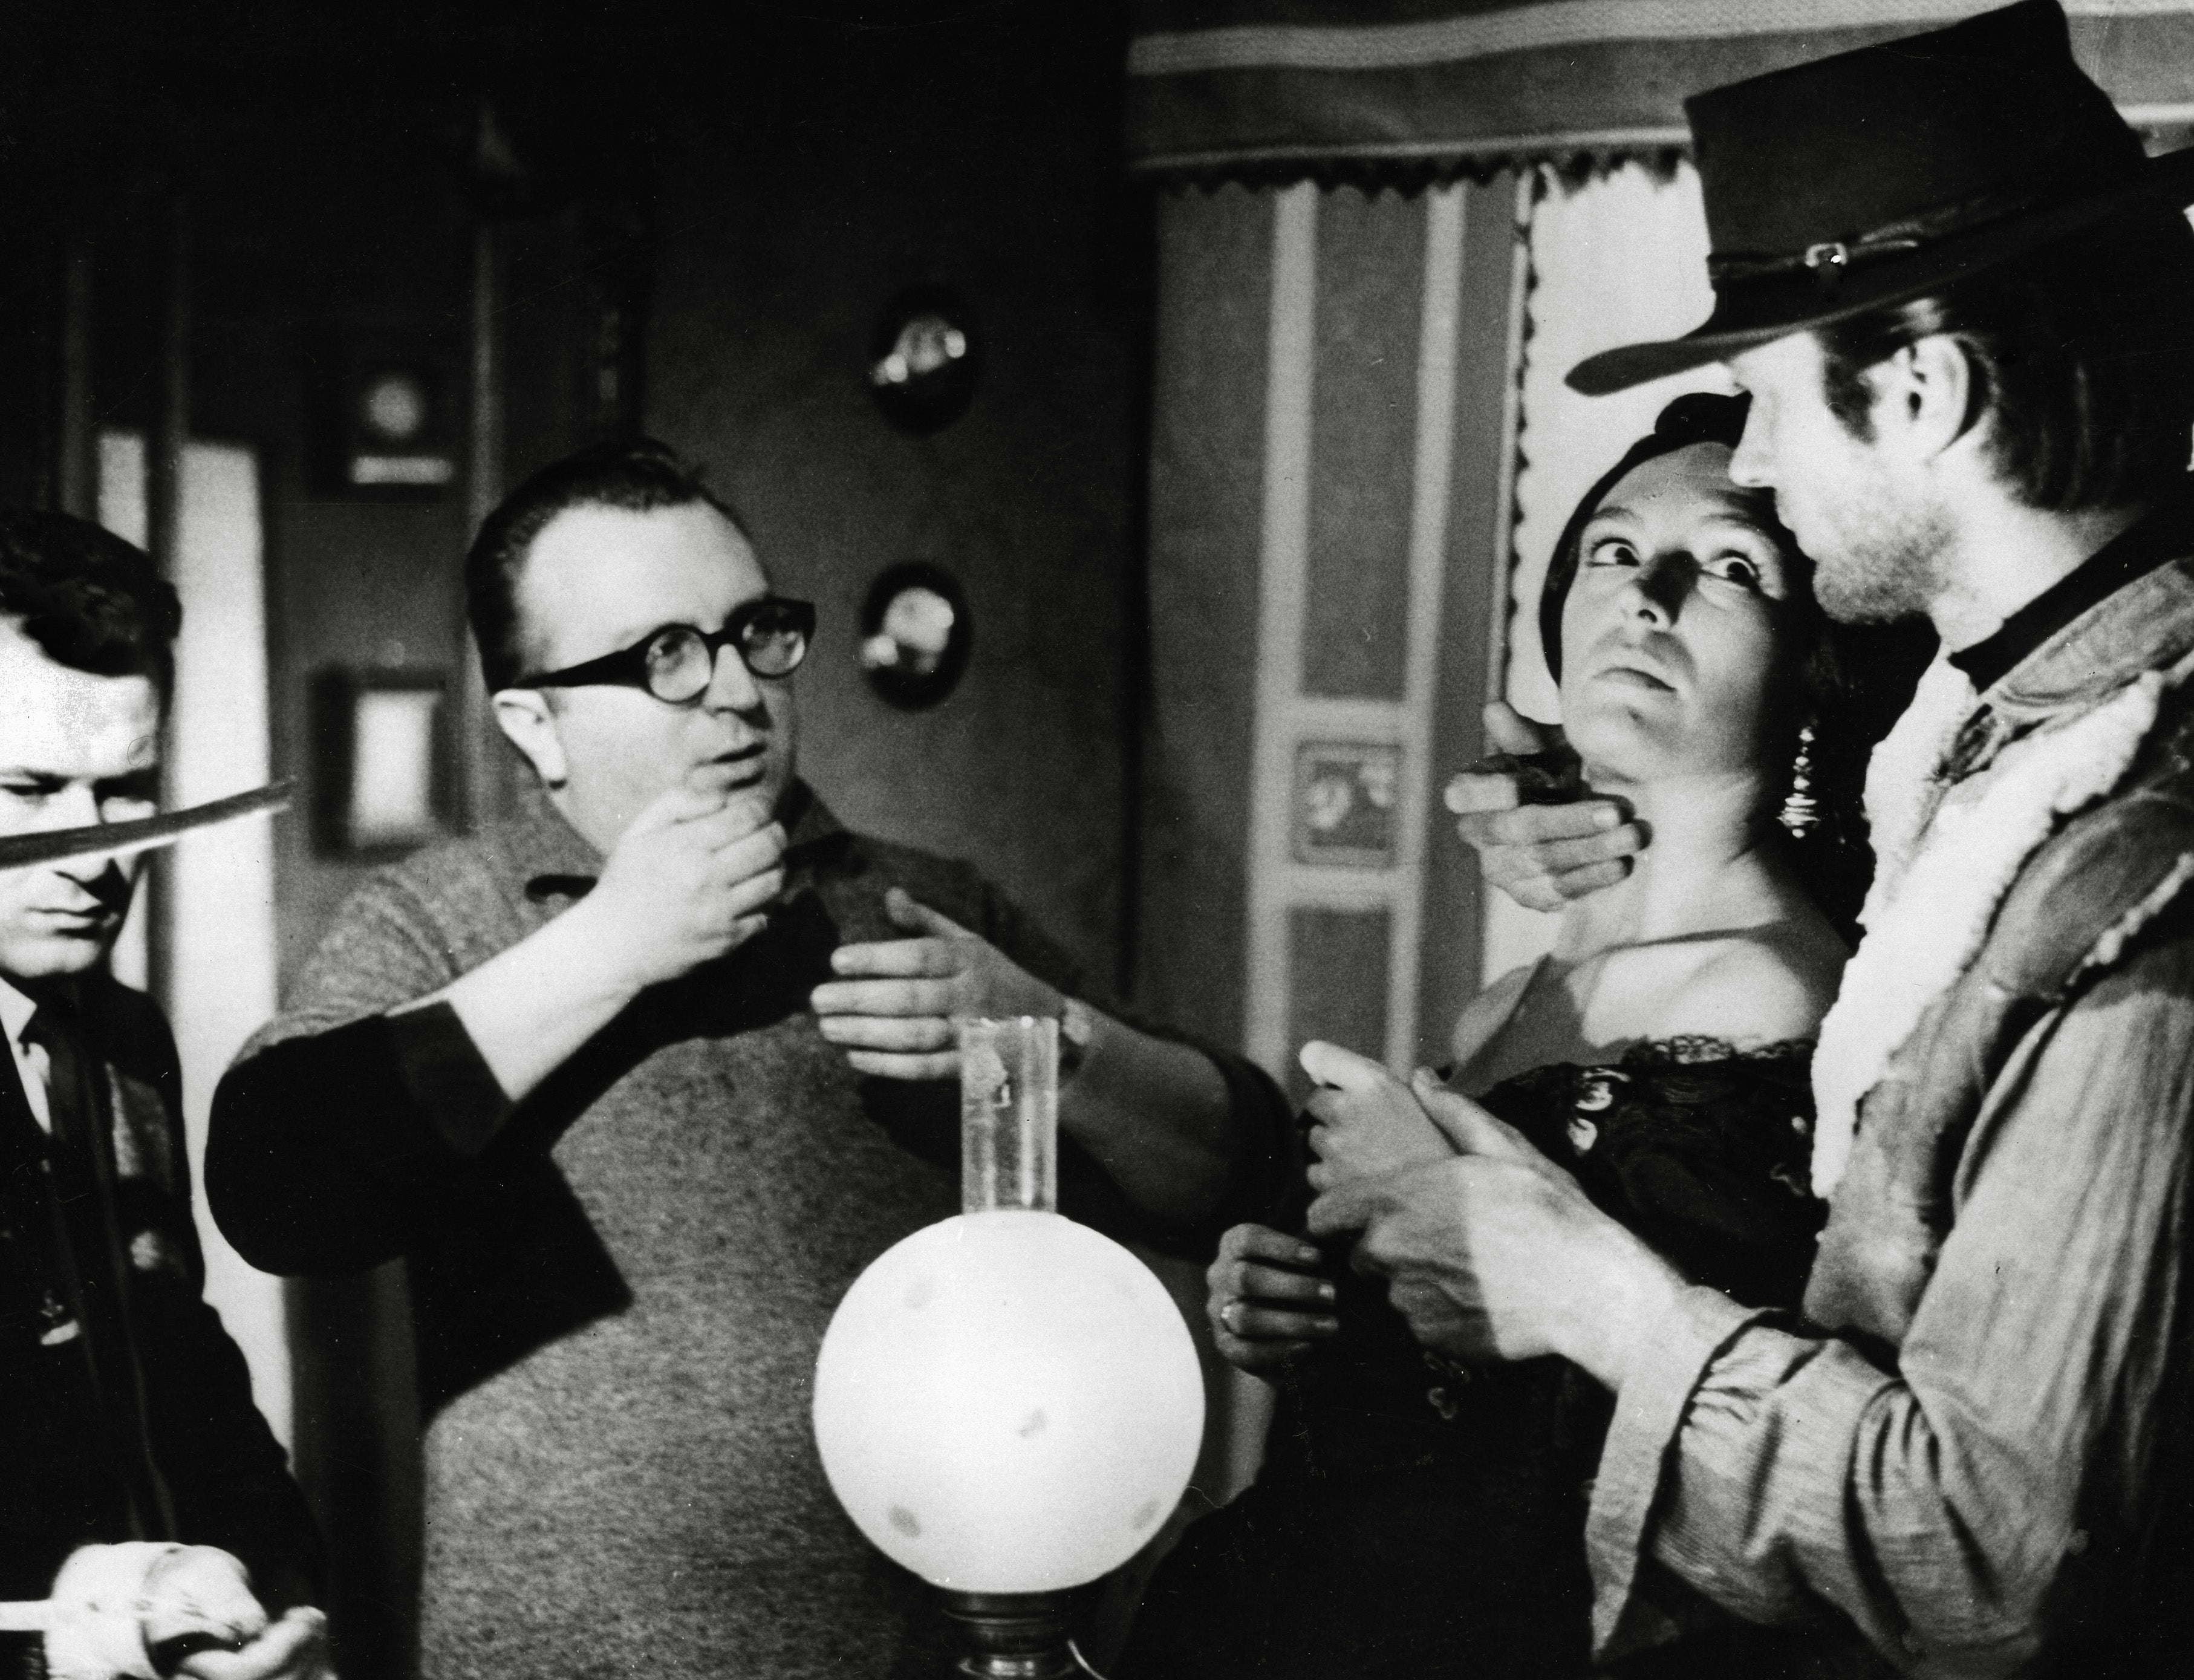 Sergio Leone, Clint Eastwood and Margarita Lozano filming ‘A Fistful of Dollars’